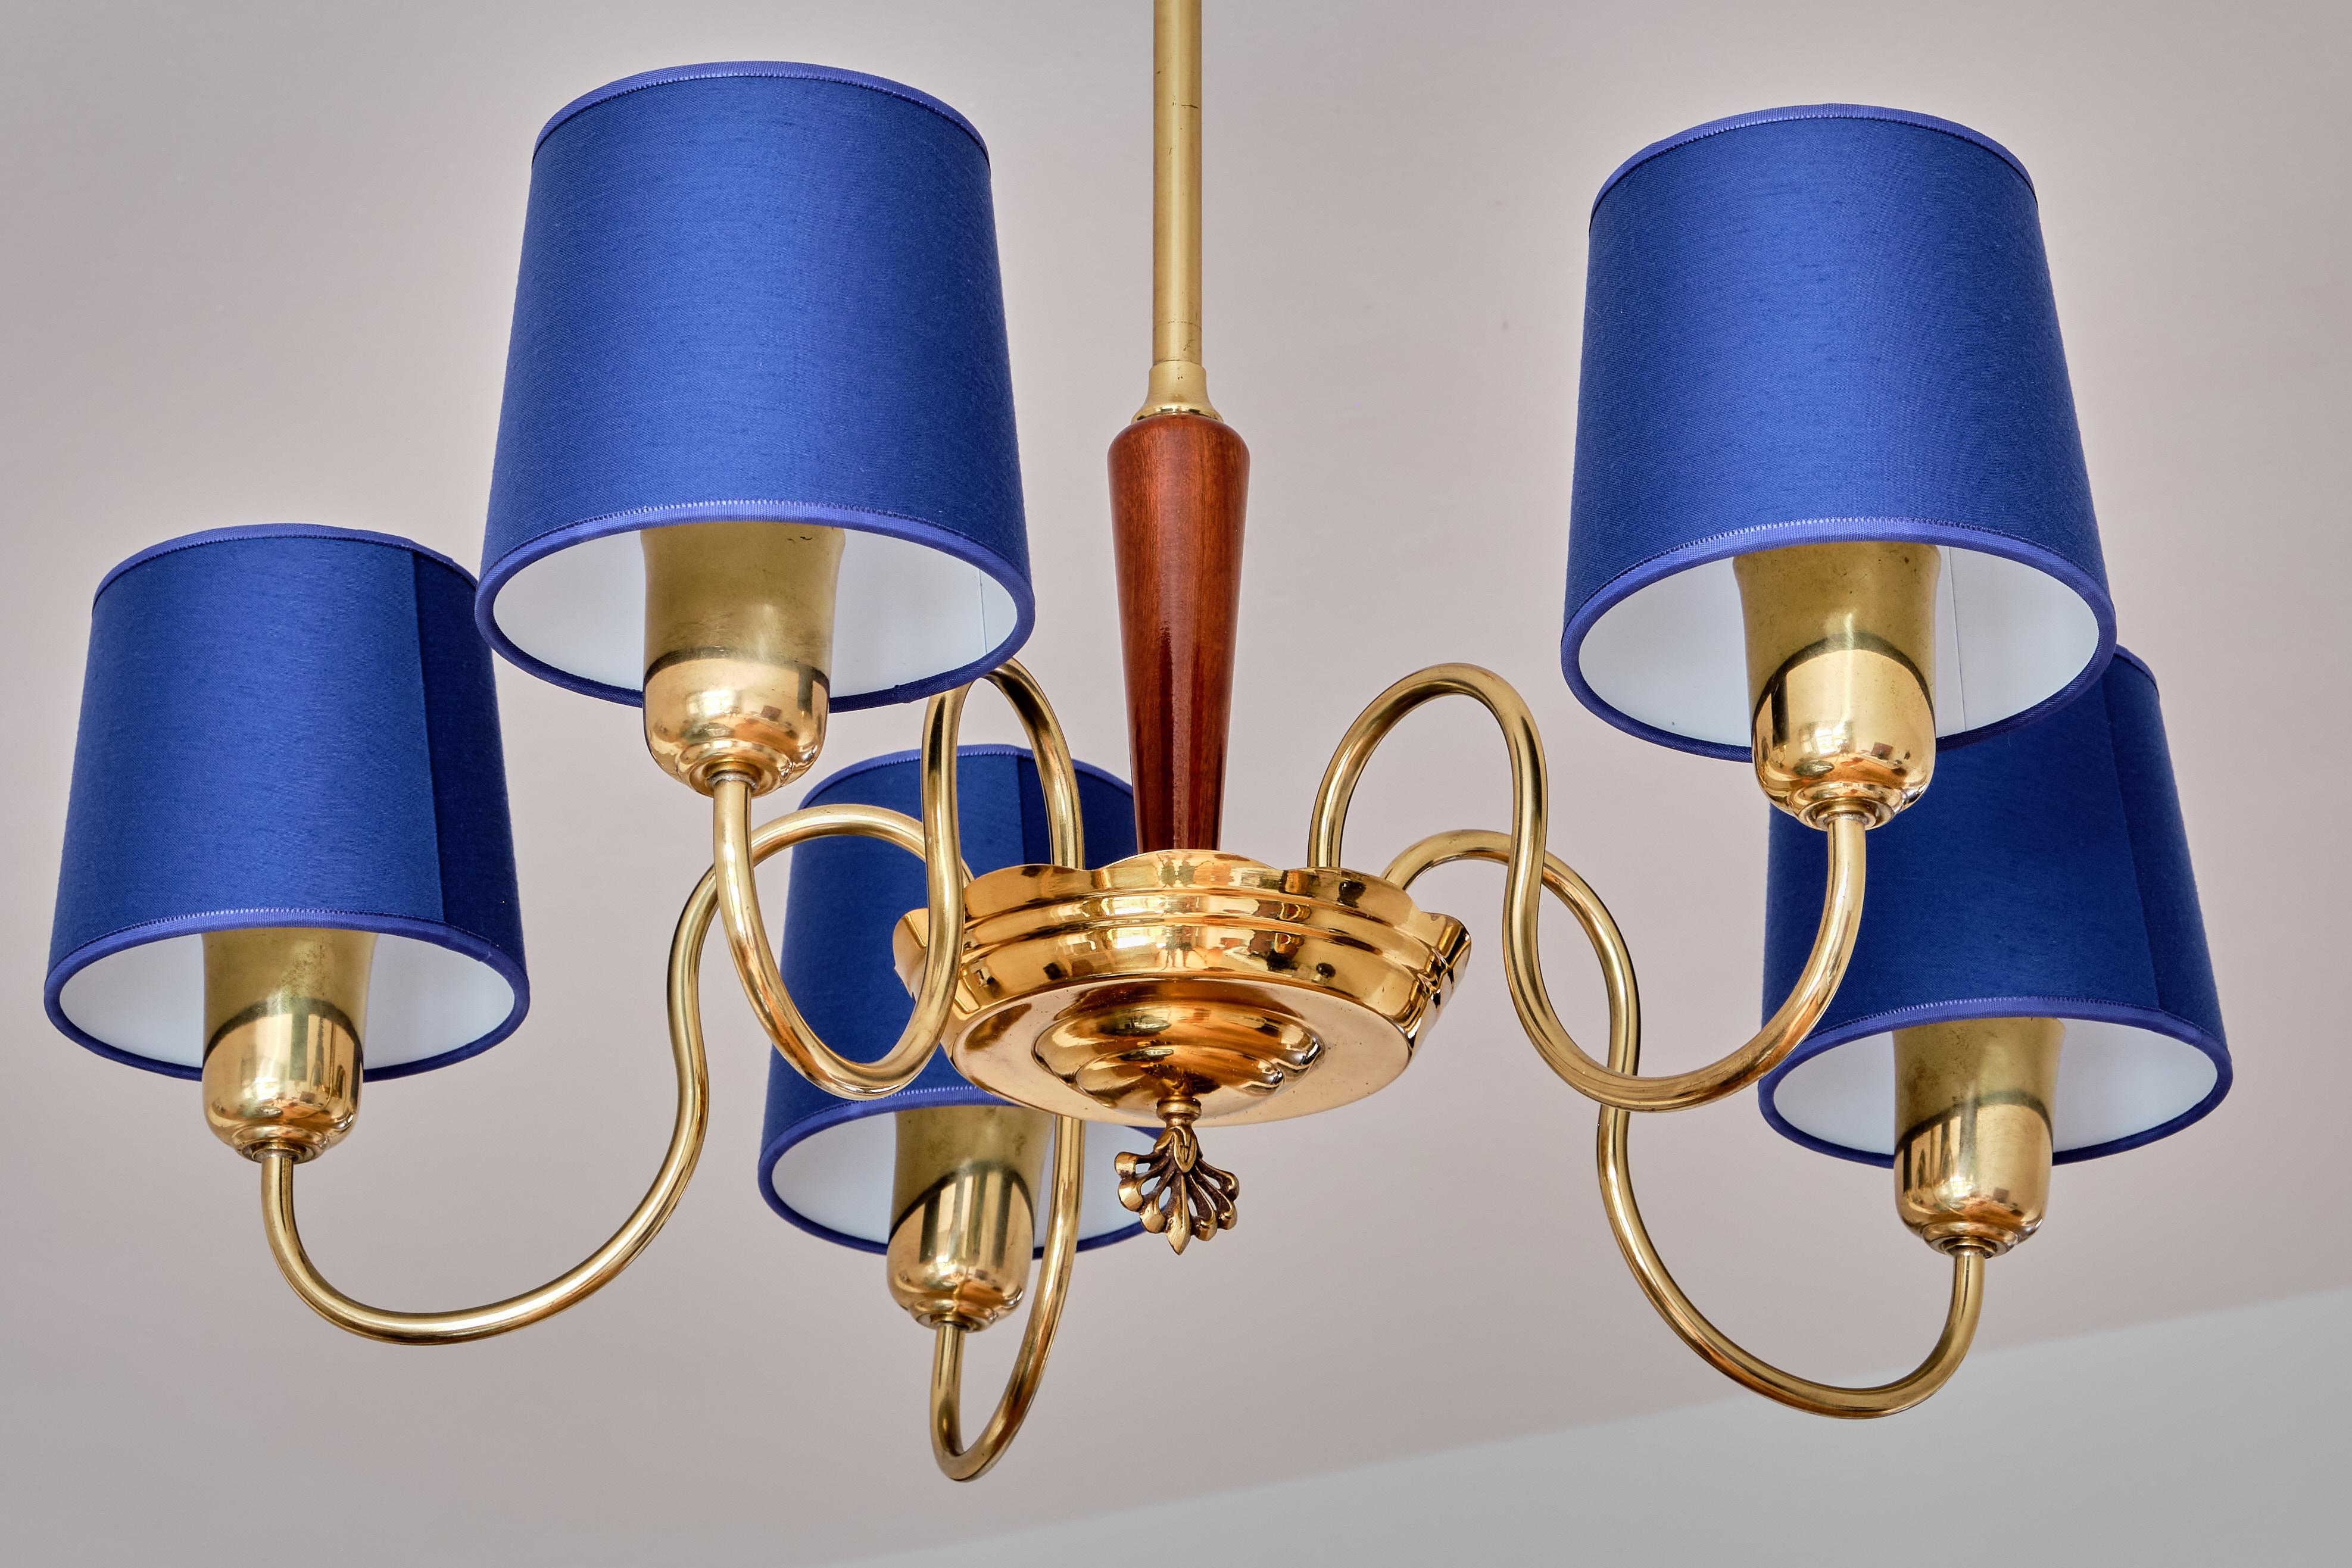 Mid-20th Century ASEA Five Arm Chandelier in Brass with Blue Shades, Sweden, 1940s